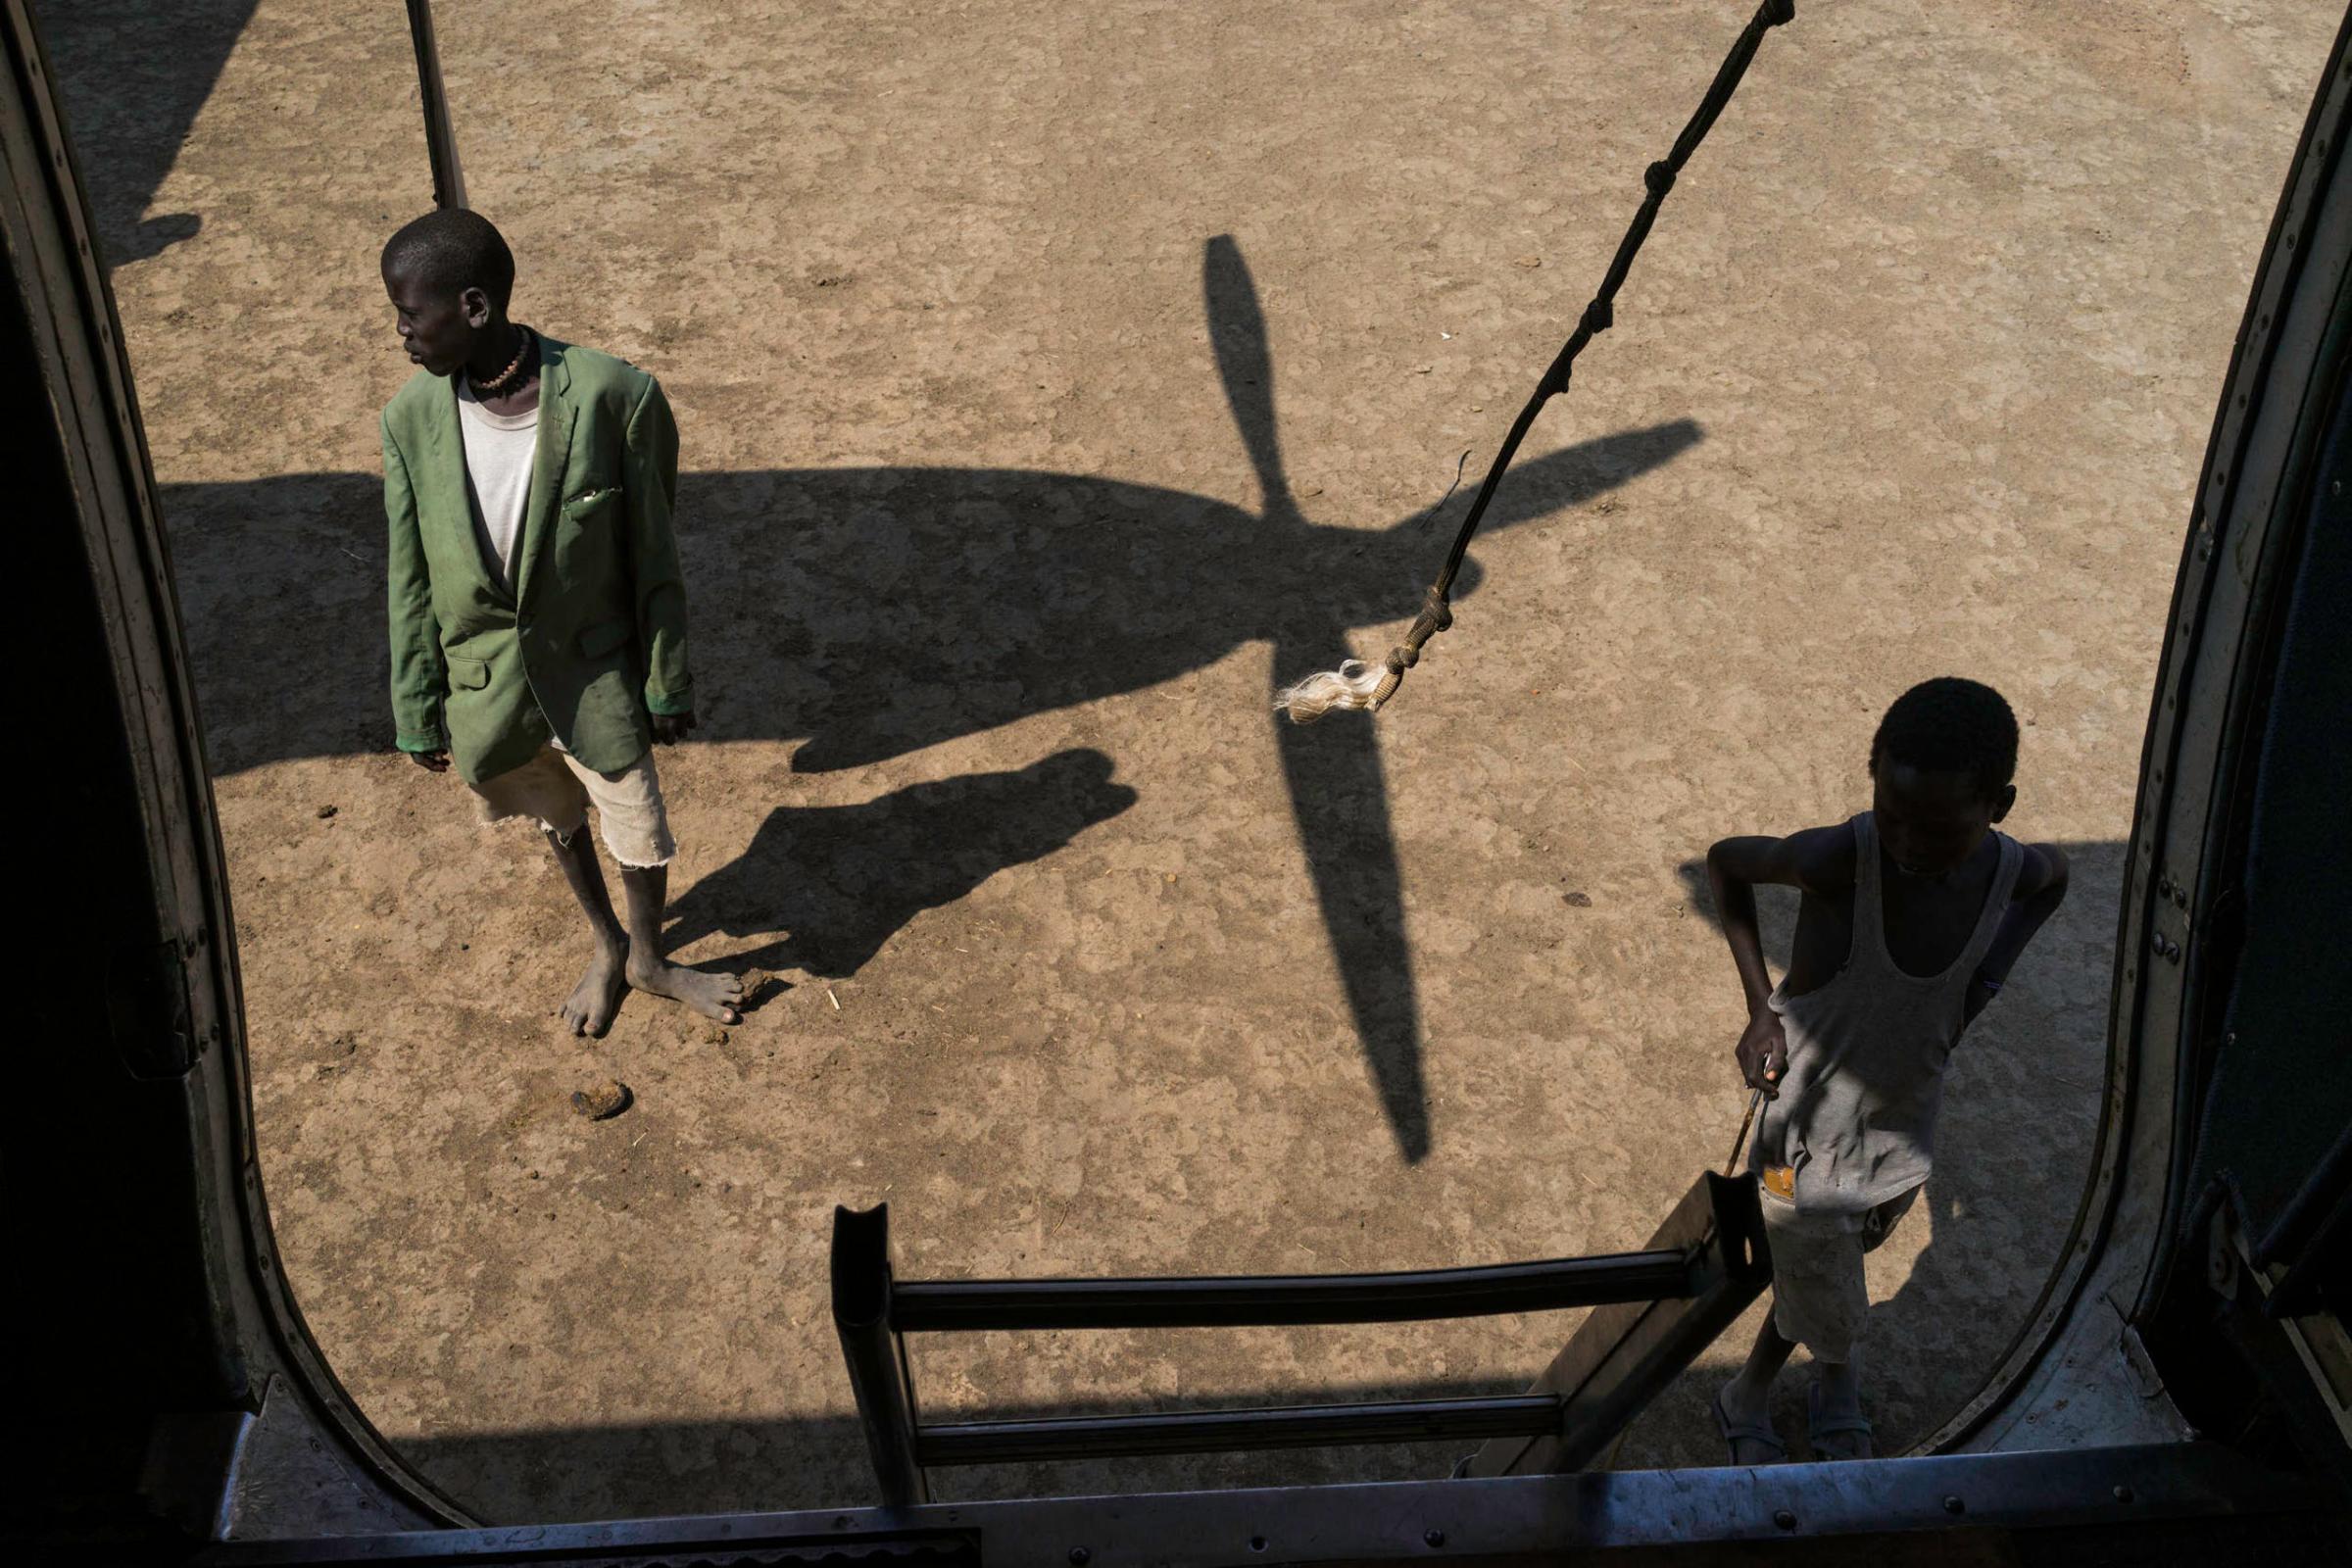 Two boys stand next to a plane that brought medical supplies to Doctors Without Borders in Leer, Unity State, South Sudan. Due to the continuing insecurity and lack of infrastructure, the only way to supply the rural hospital is by air.